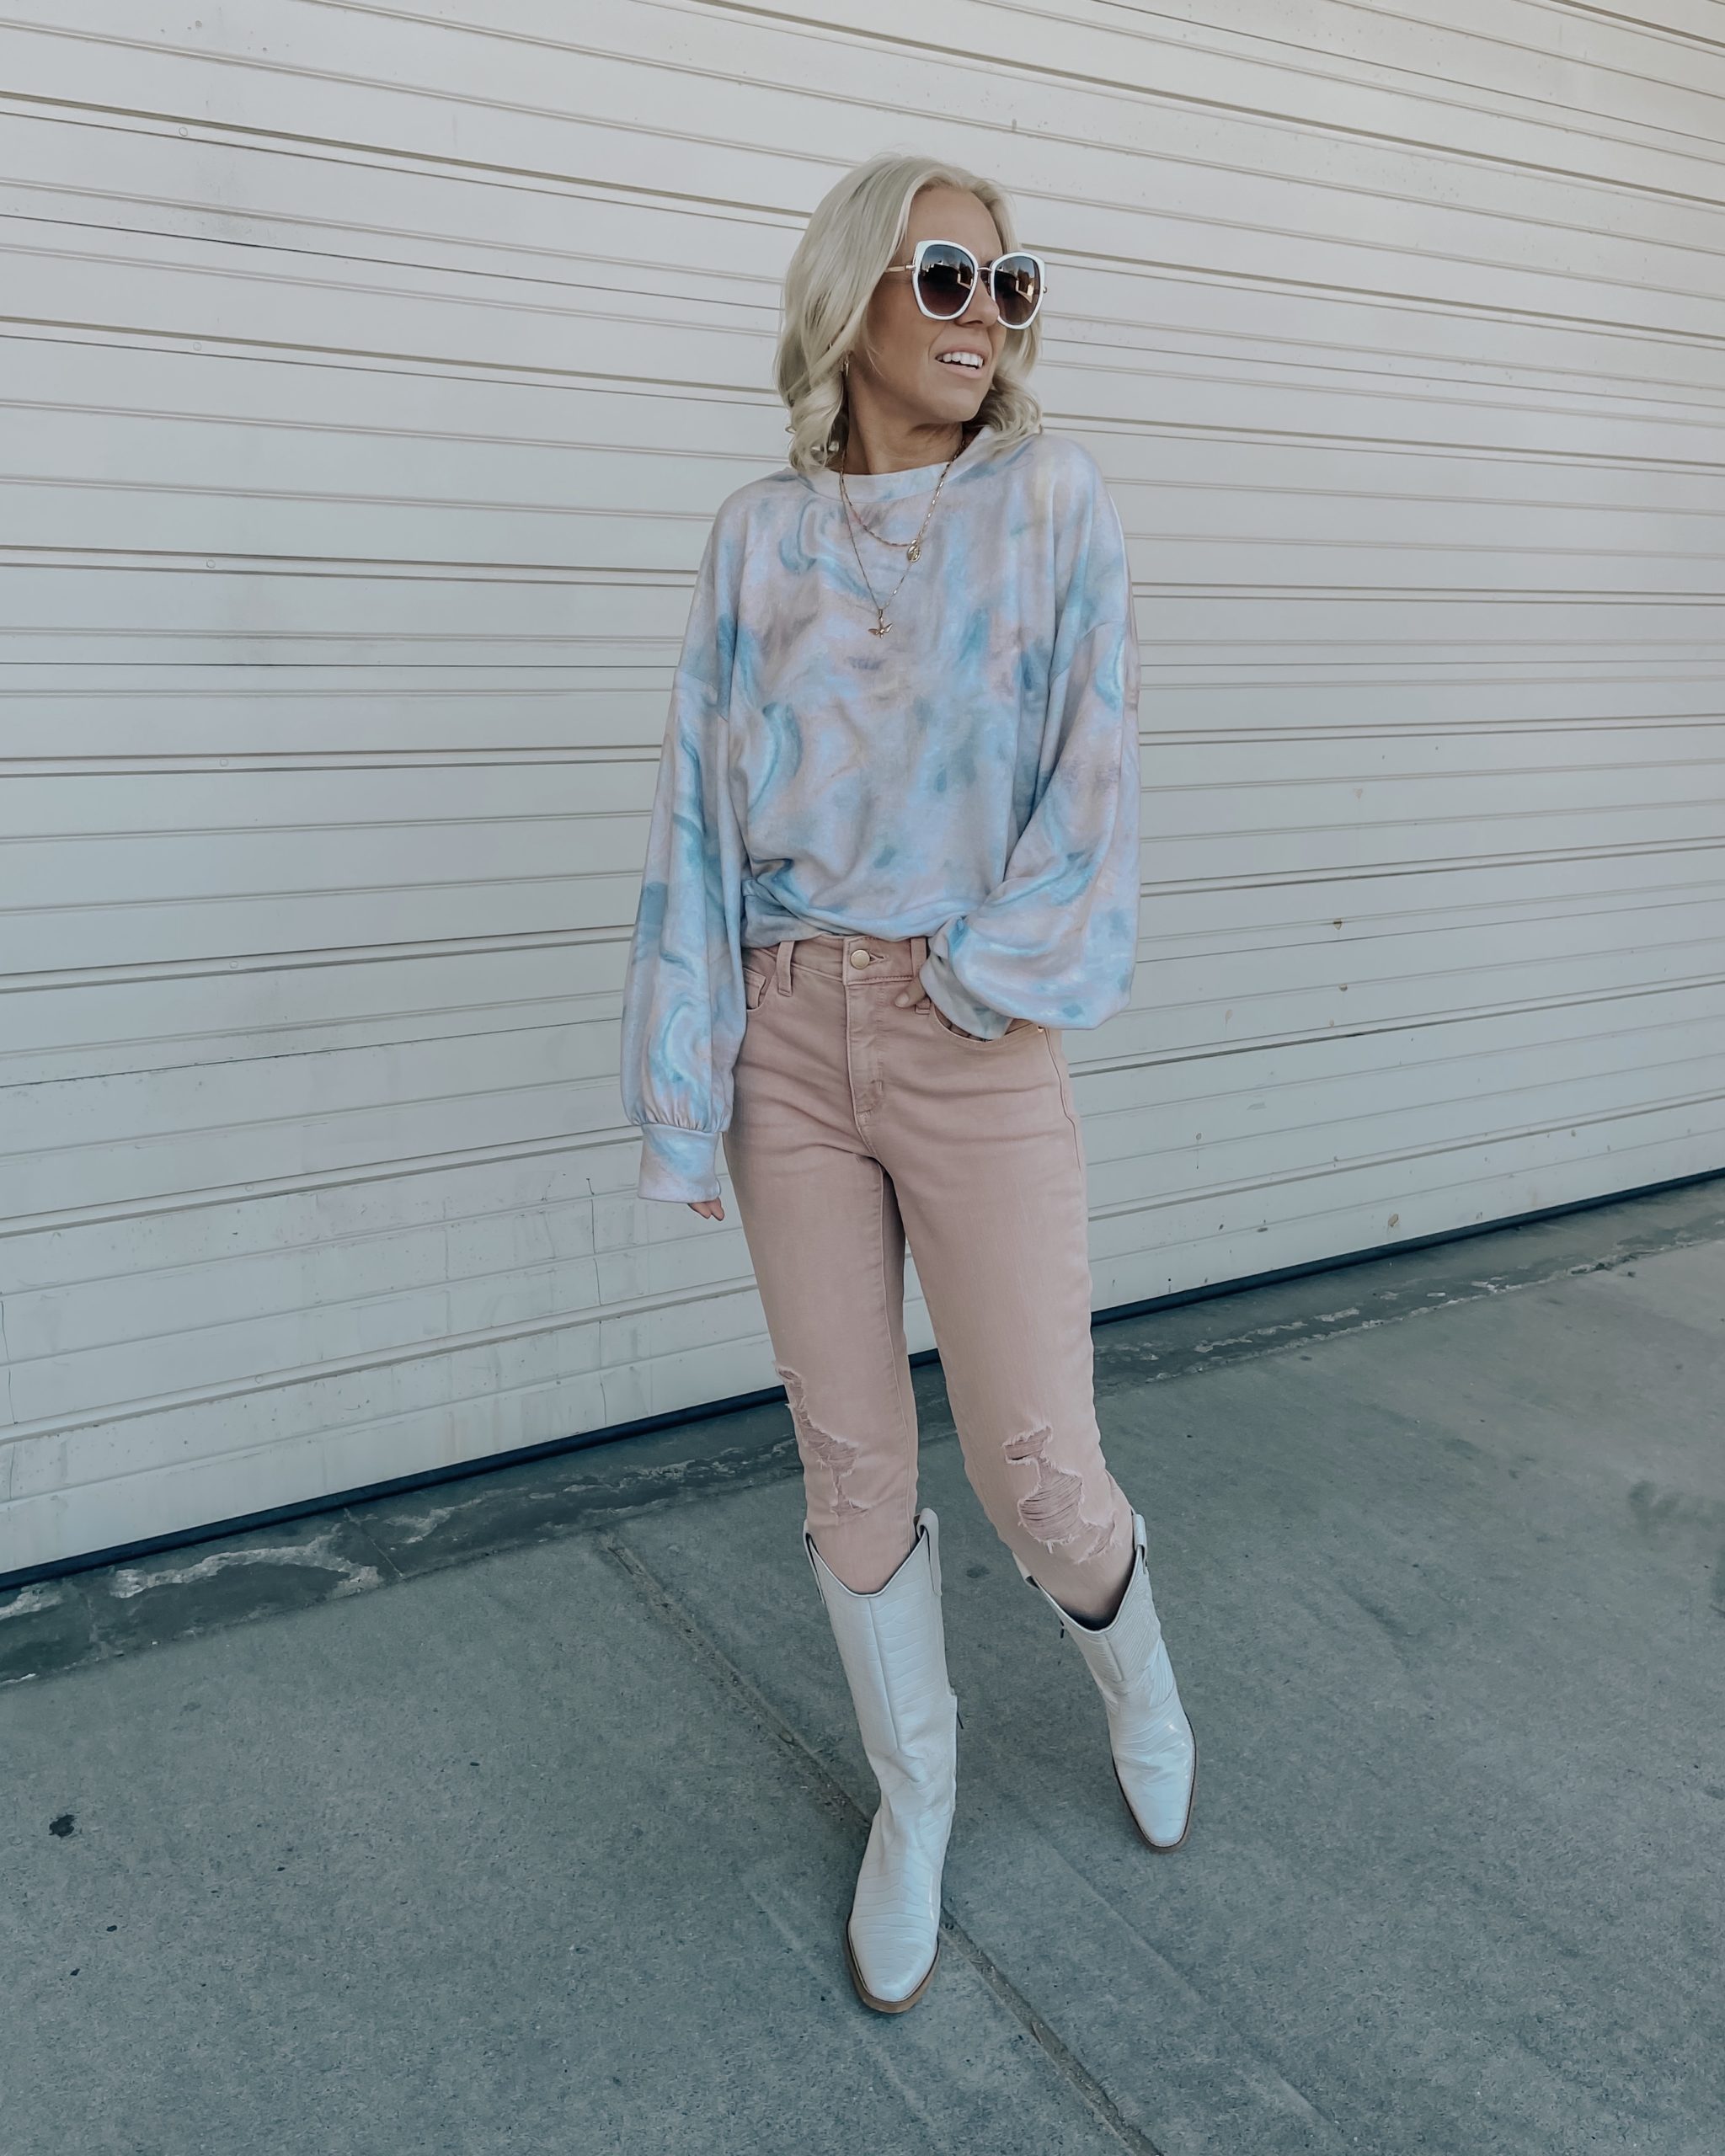 SPRING TREND ALERT: PASTELS- Jaclyn De Leon Style + the new color palette for spring is pastels and I couldn't be more excited about it. These pastel pink jeans are a new favorite and perfect for the season.